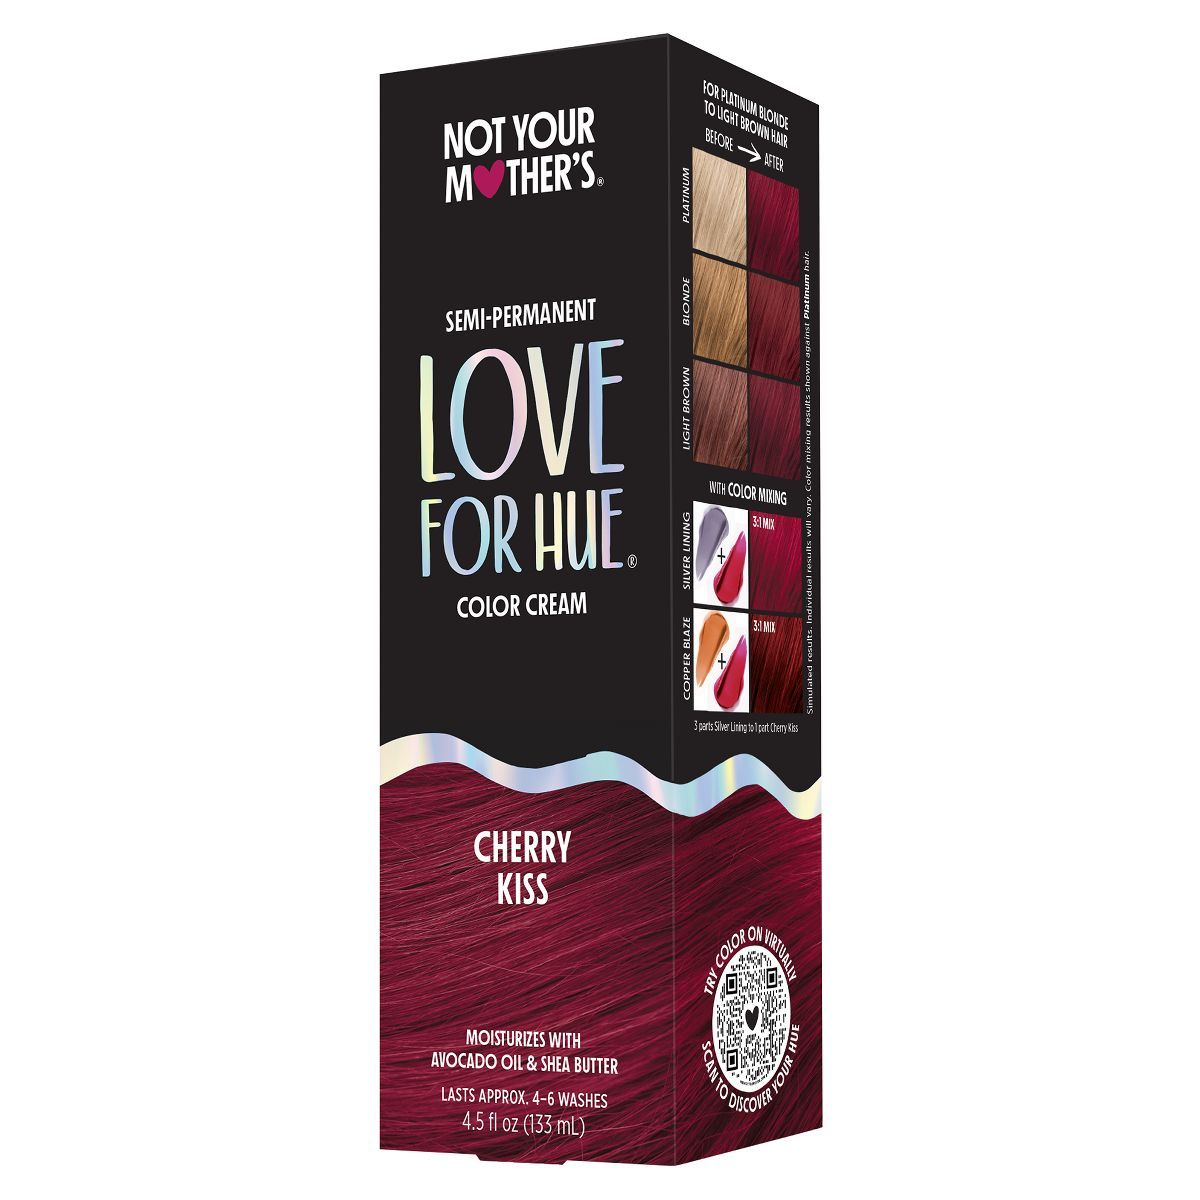 Not Your Mother's Love for Hue Semi-Permanent Hair Color Cream - Cherry Kiss - 4.5 fl oz | Target